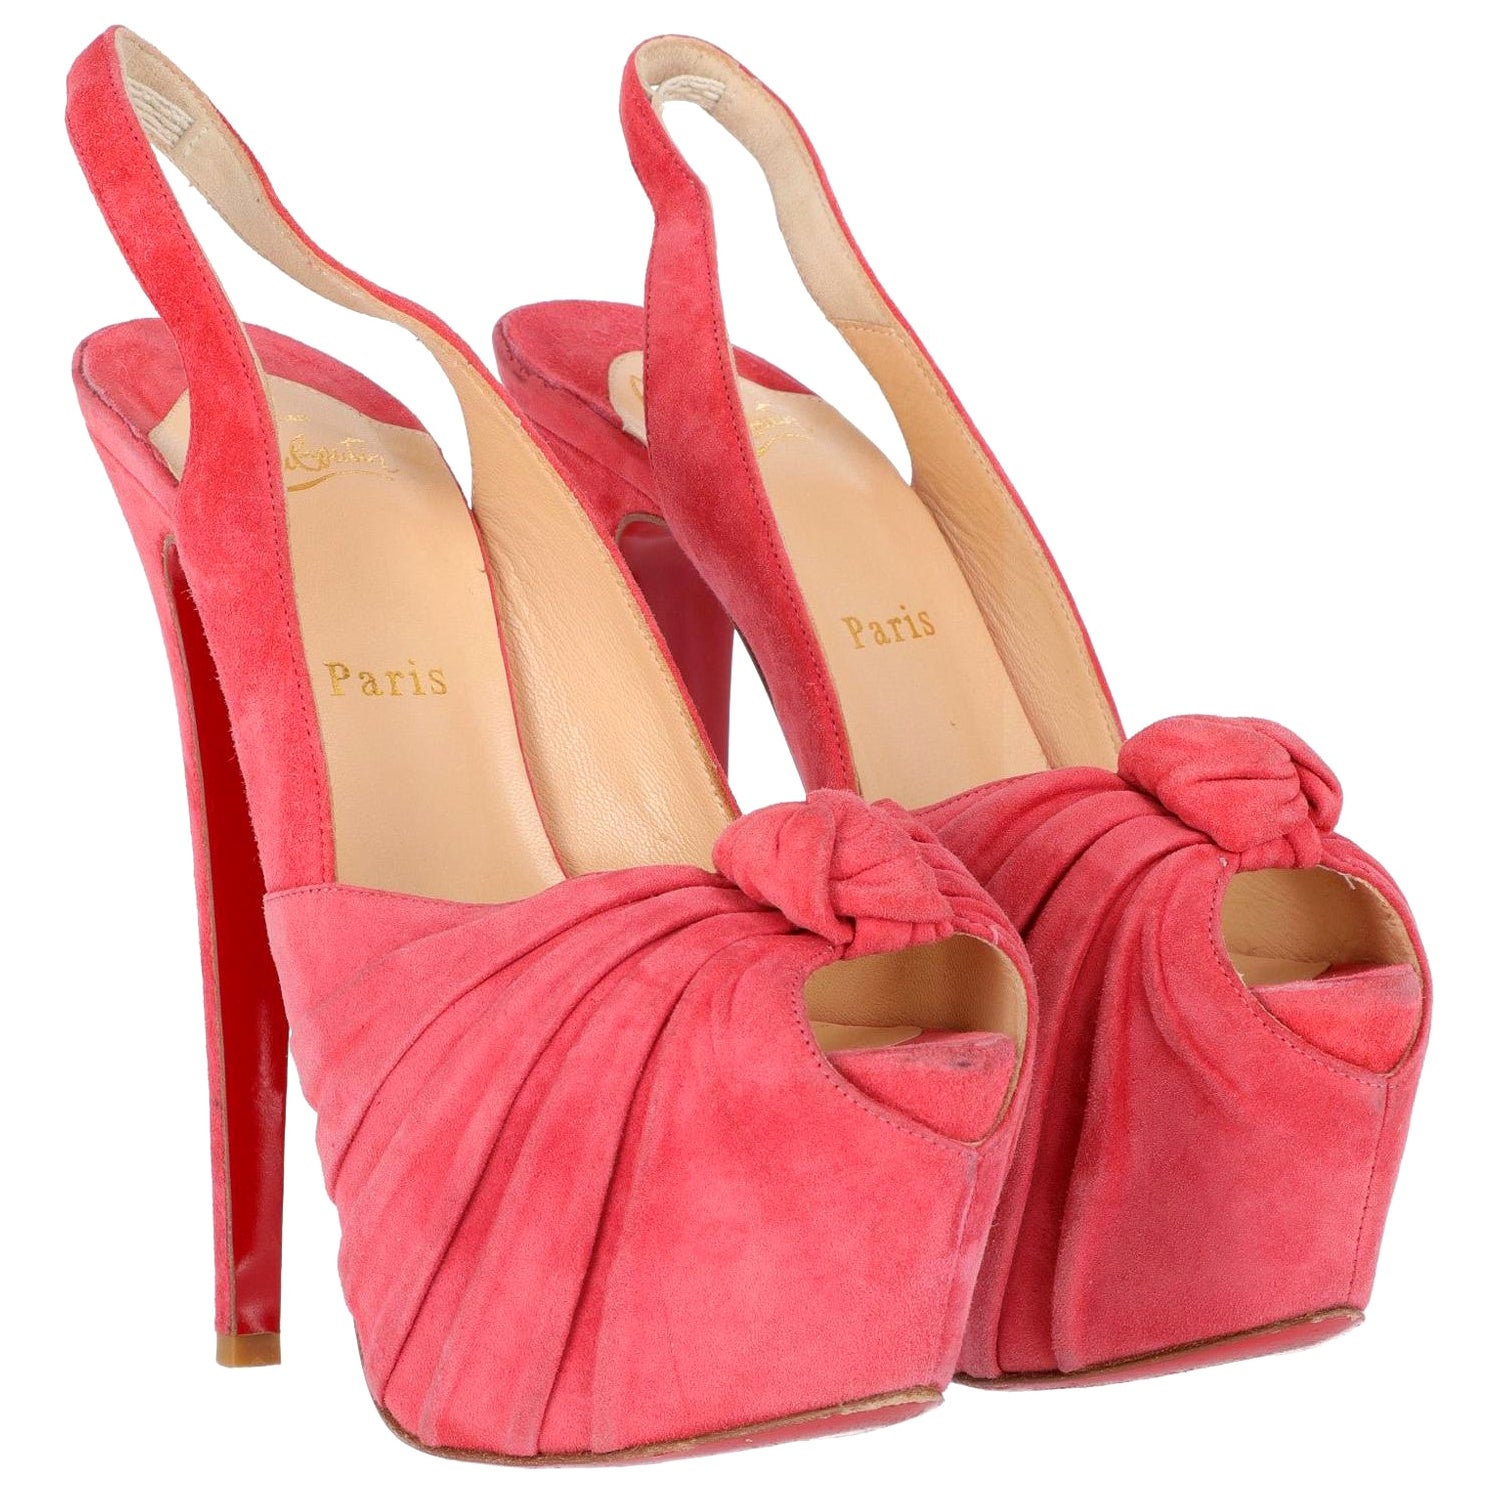 2010s Christian Louboutin Pink Pumps For Sale